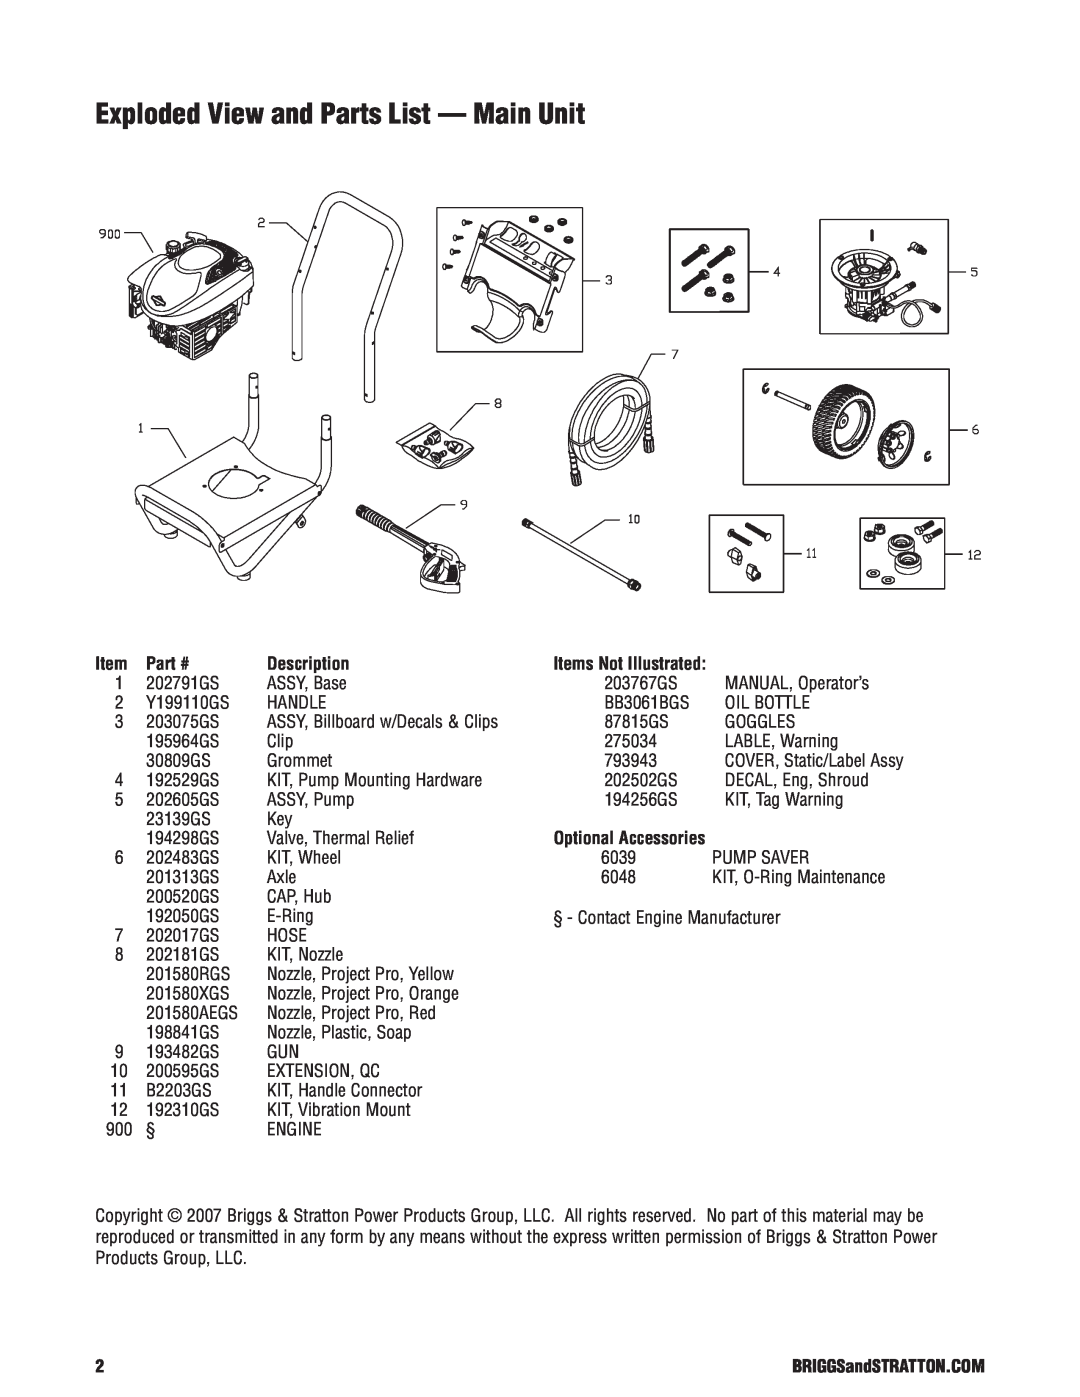 Briggs & Stratton 20319 manual Exploded View and Parts List - Main Unit, Item, Description 